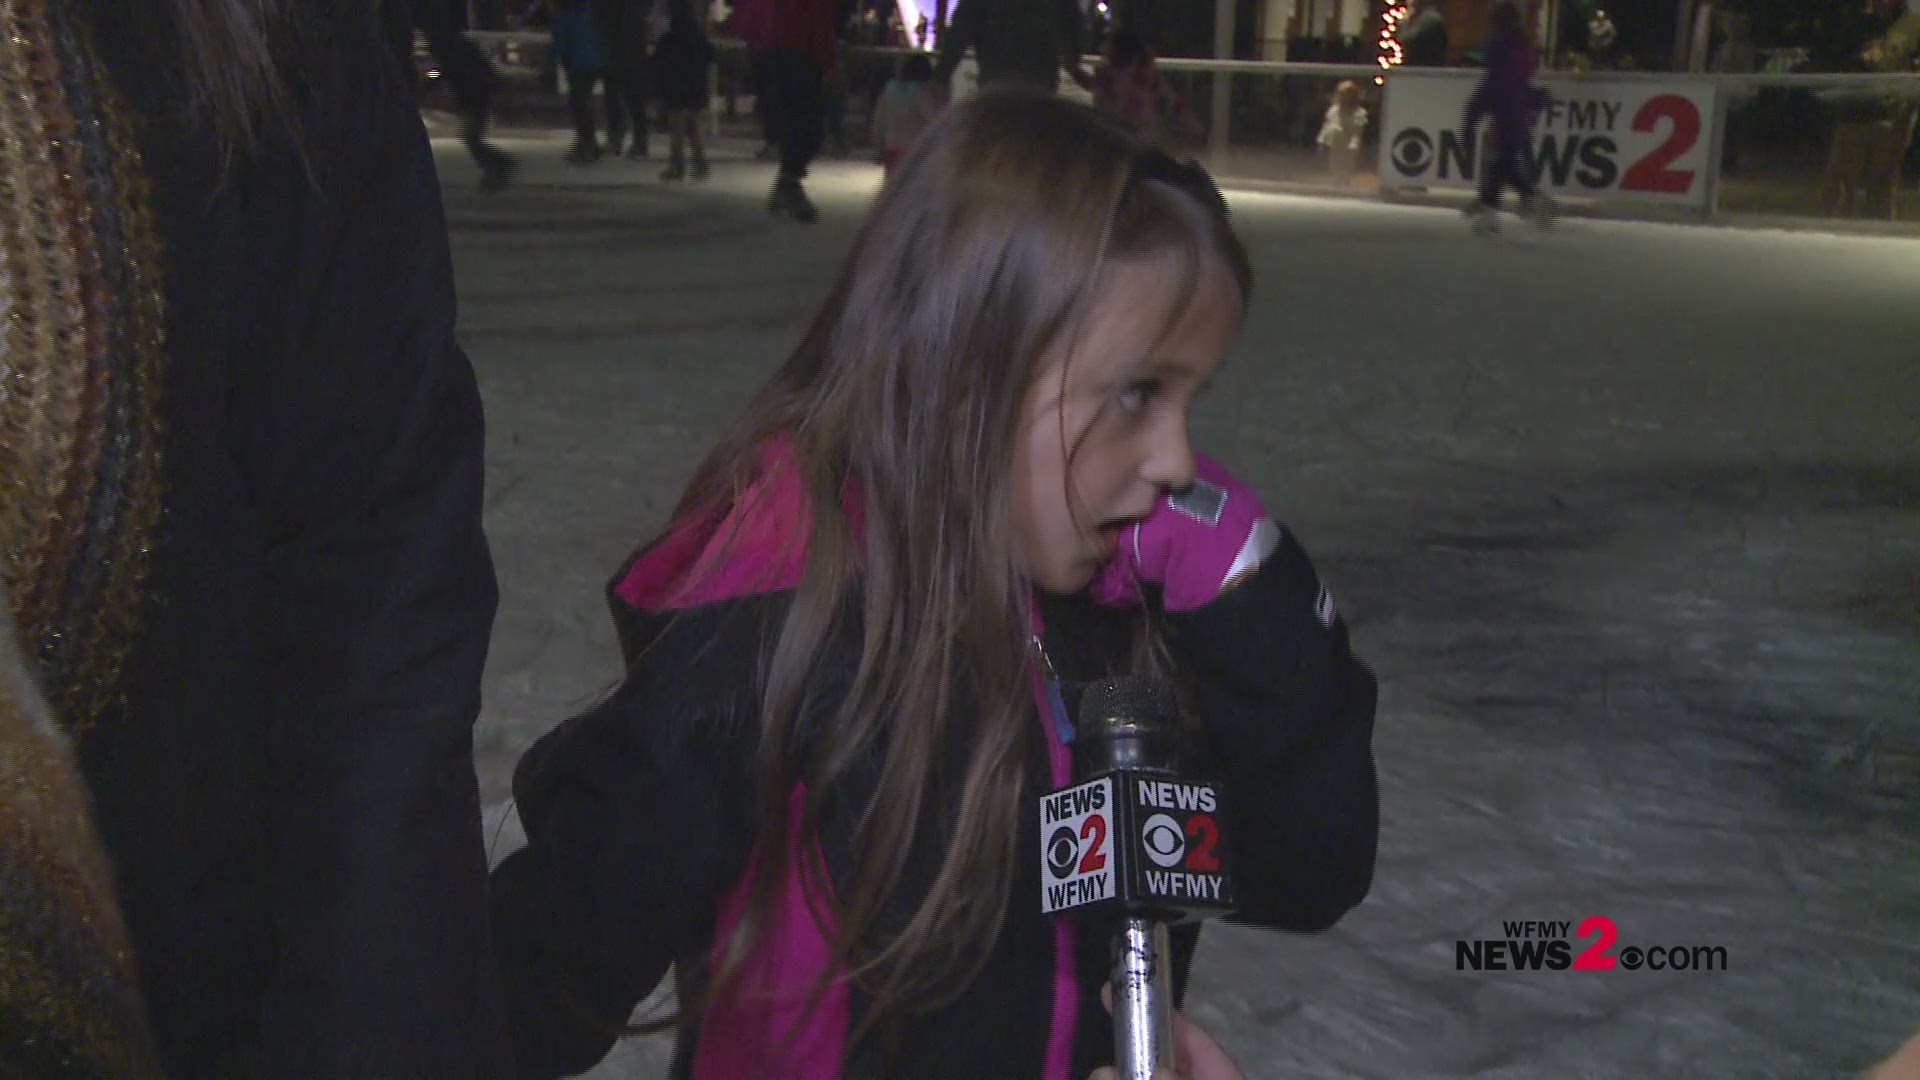 Chad Silber interviews young girl excited for WFMY News 2's Winterfest. Here's what she said she can't get enough of at Winterfest in adorable interview.